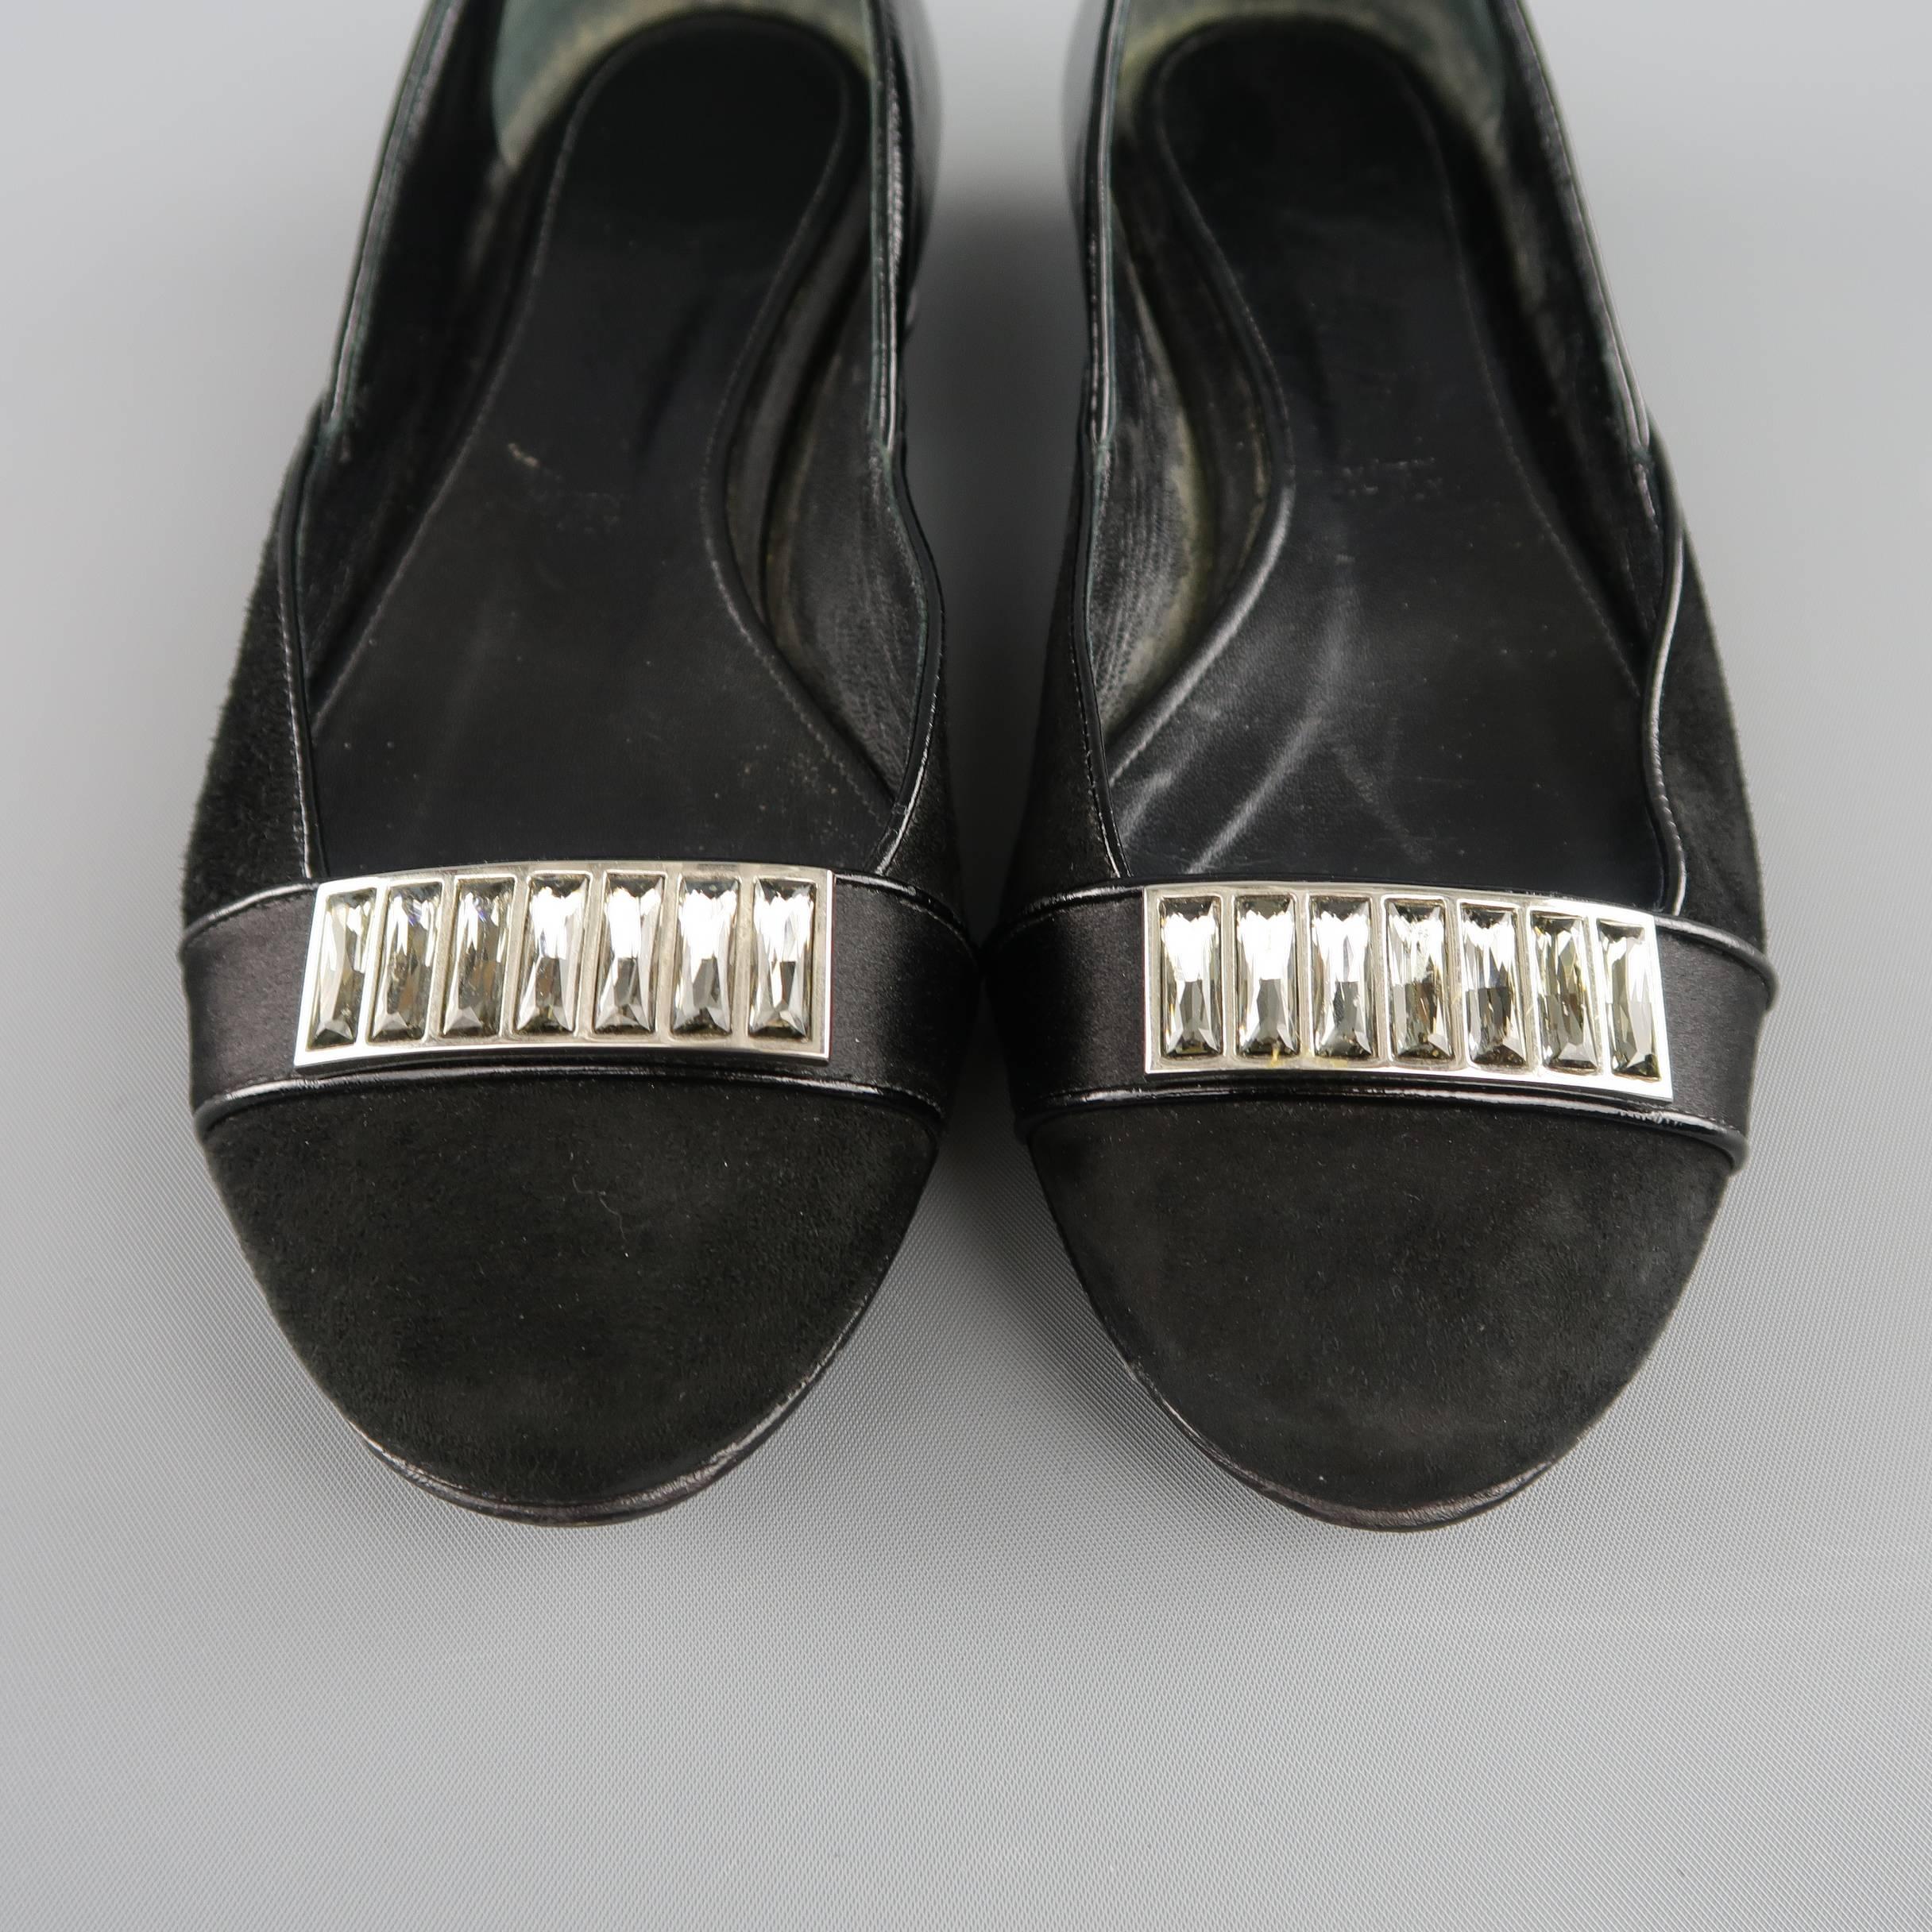 JUDITH LEIBER flats come in black suede and feature a patent leather heel panel, and satin strap detail with rhinestone brooch applique. Made in Italy.
 
Good Pre-Owned Condition.
Marked: 5 B
 
Outsole: 9 x 3 in.


SKU: 79247